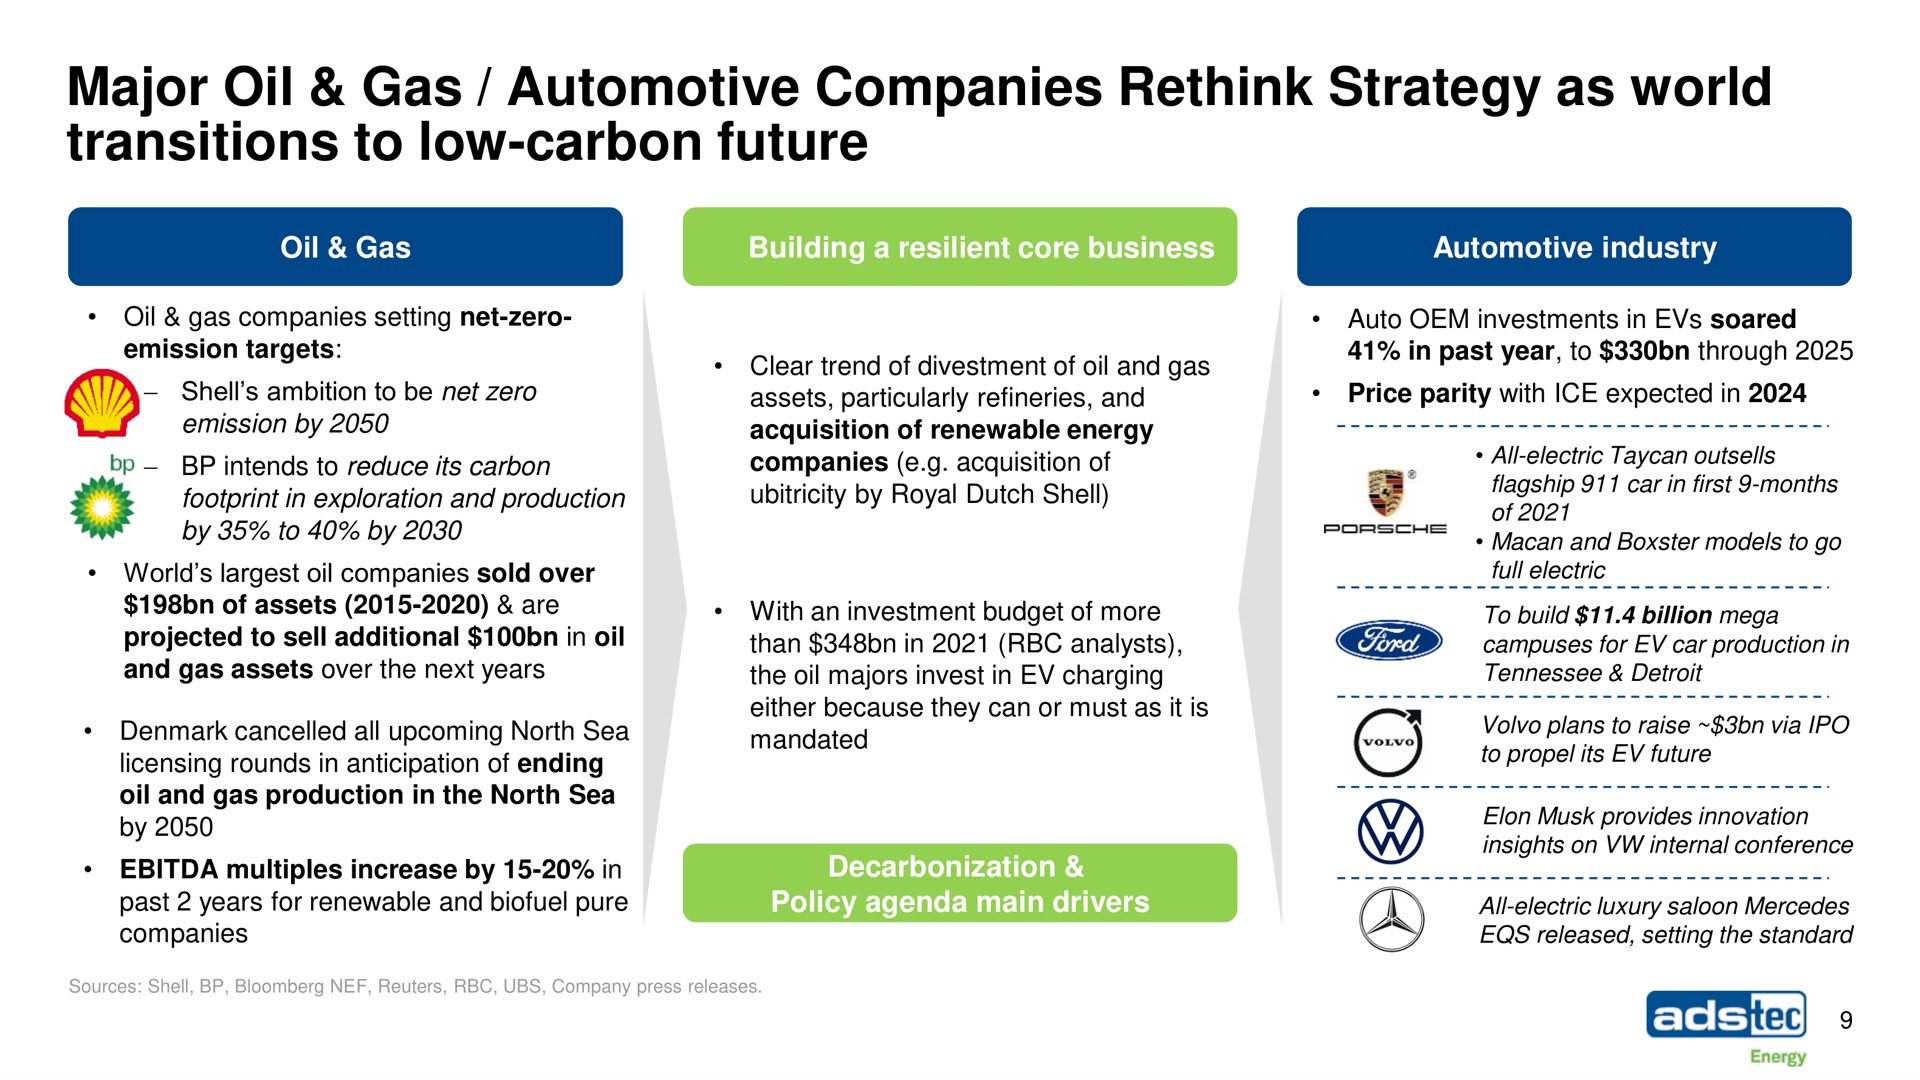 major oil gas automotive companies rethink strategy as world transitions to low carbon future | ads-tec Energy